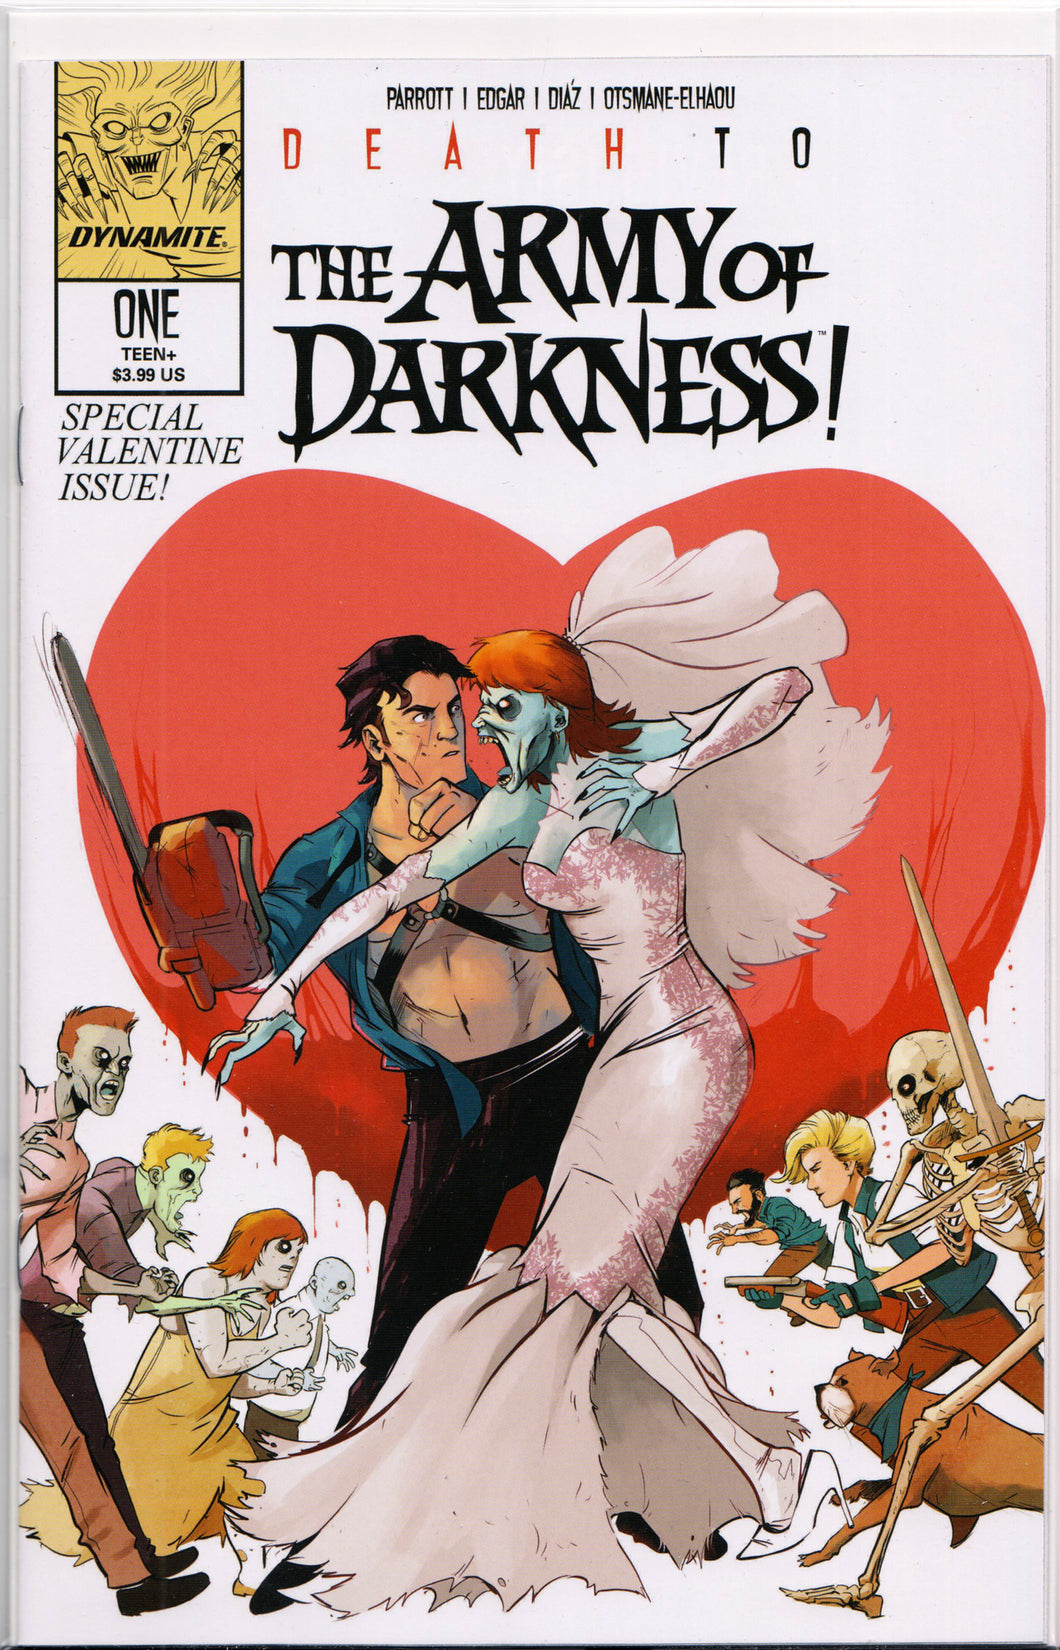 DEATH TO THE ARMY OF DARKNESS #1 (PIRIZ VARIANT) COMIC BOOK ~ Dynamite